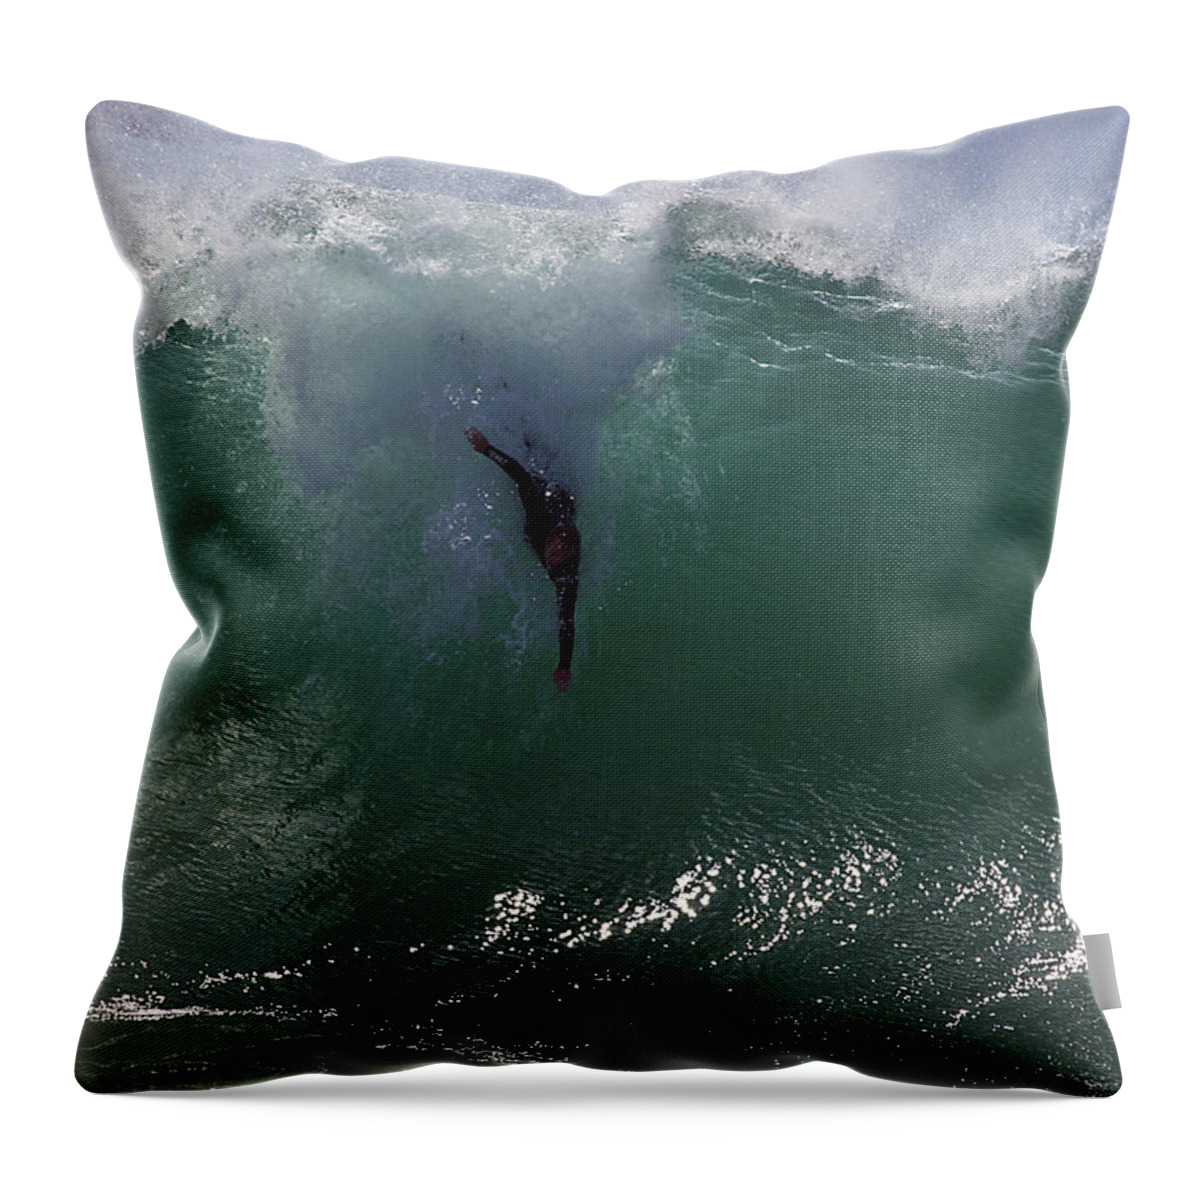 Big Surf Throw Pillow featuring the photograph Hold Your Breath by Joe Schofield